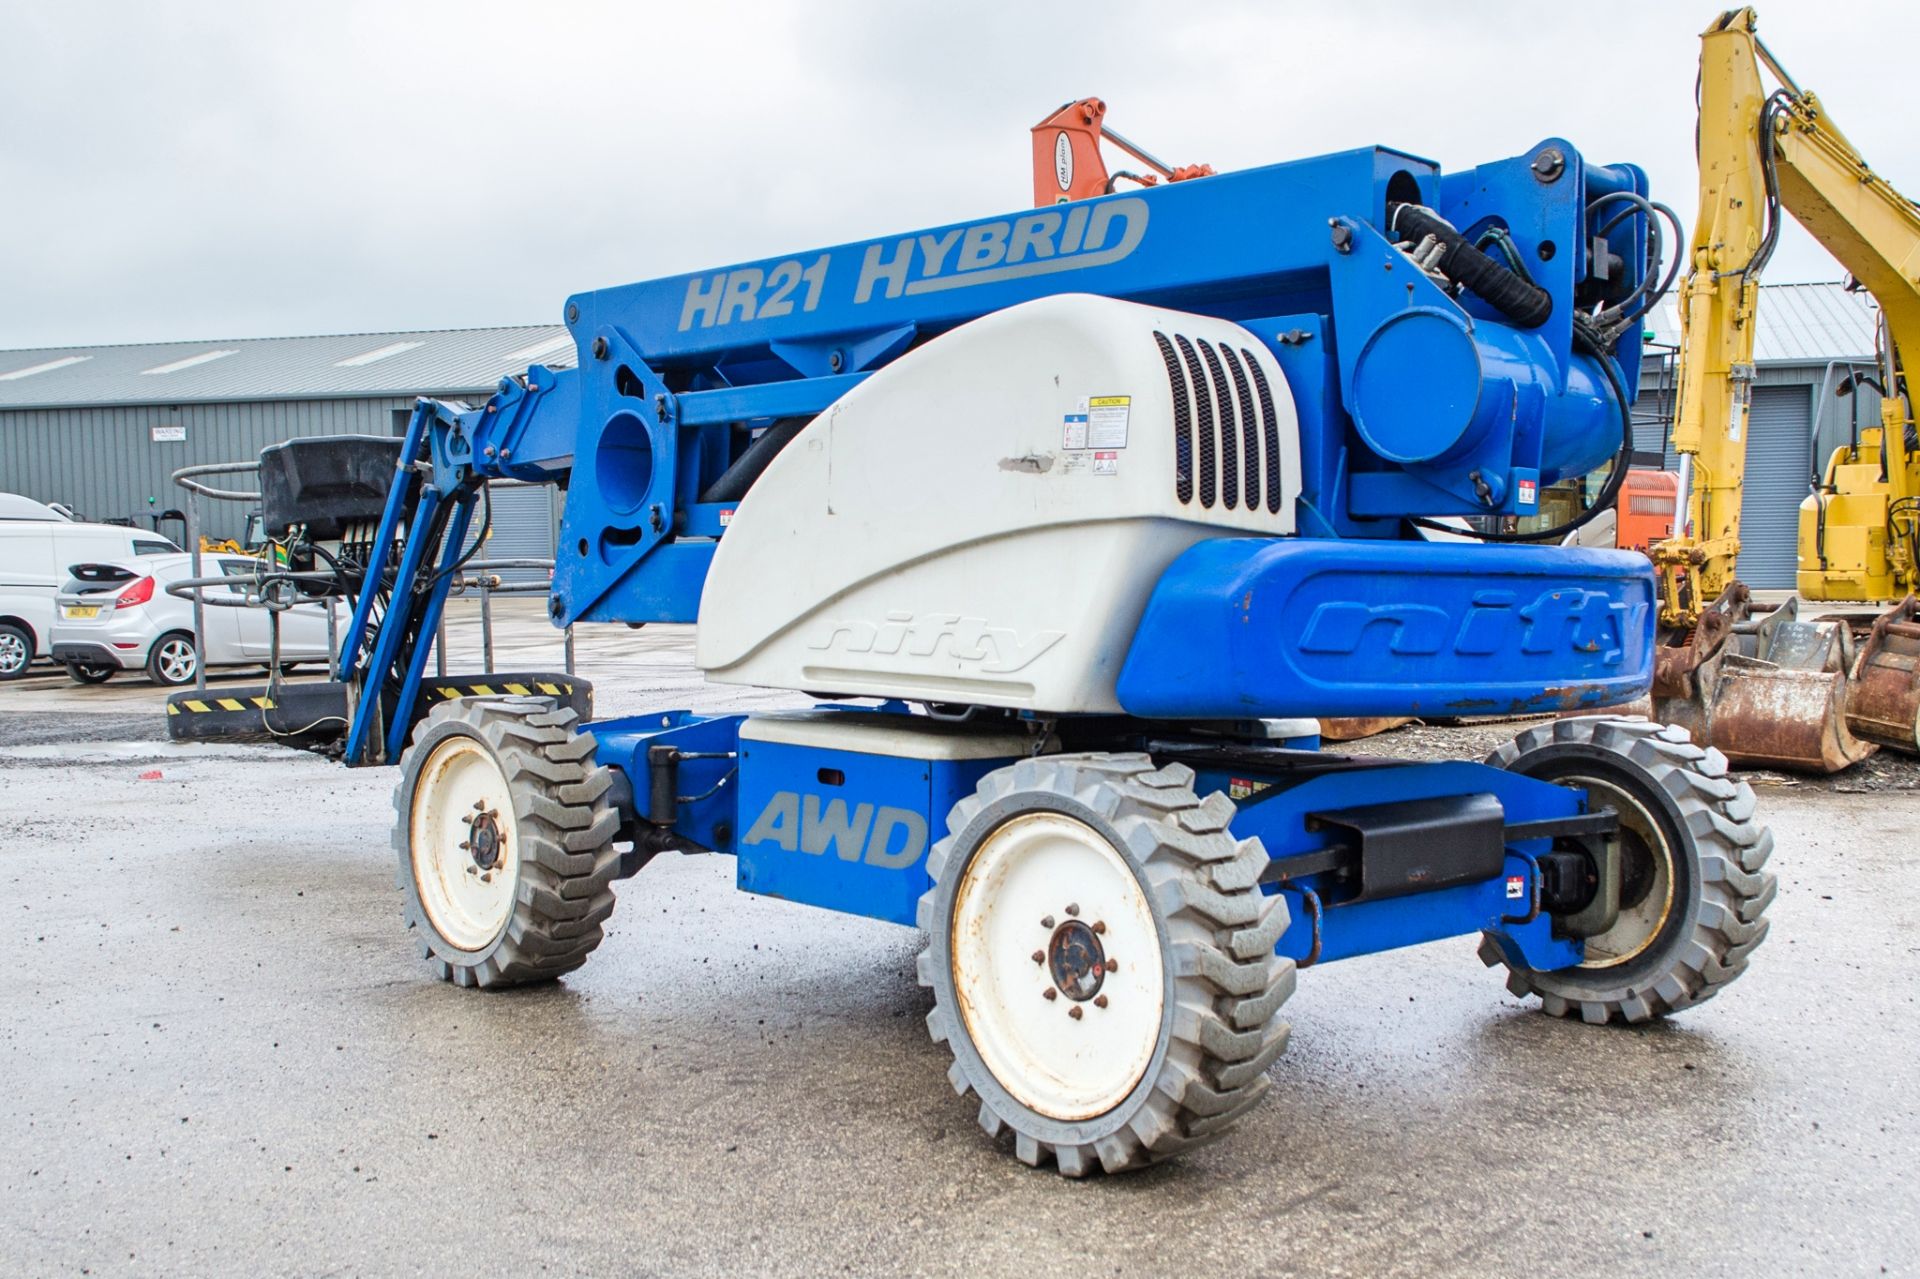 Nifty HR21 Hybrid AWD battery electric/diesel articulated boom lift Year: 2012 S/N: 20881 Recorded - Image 2 of 16